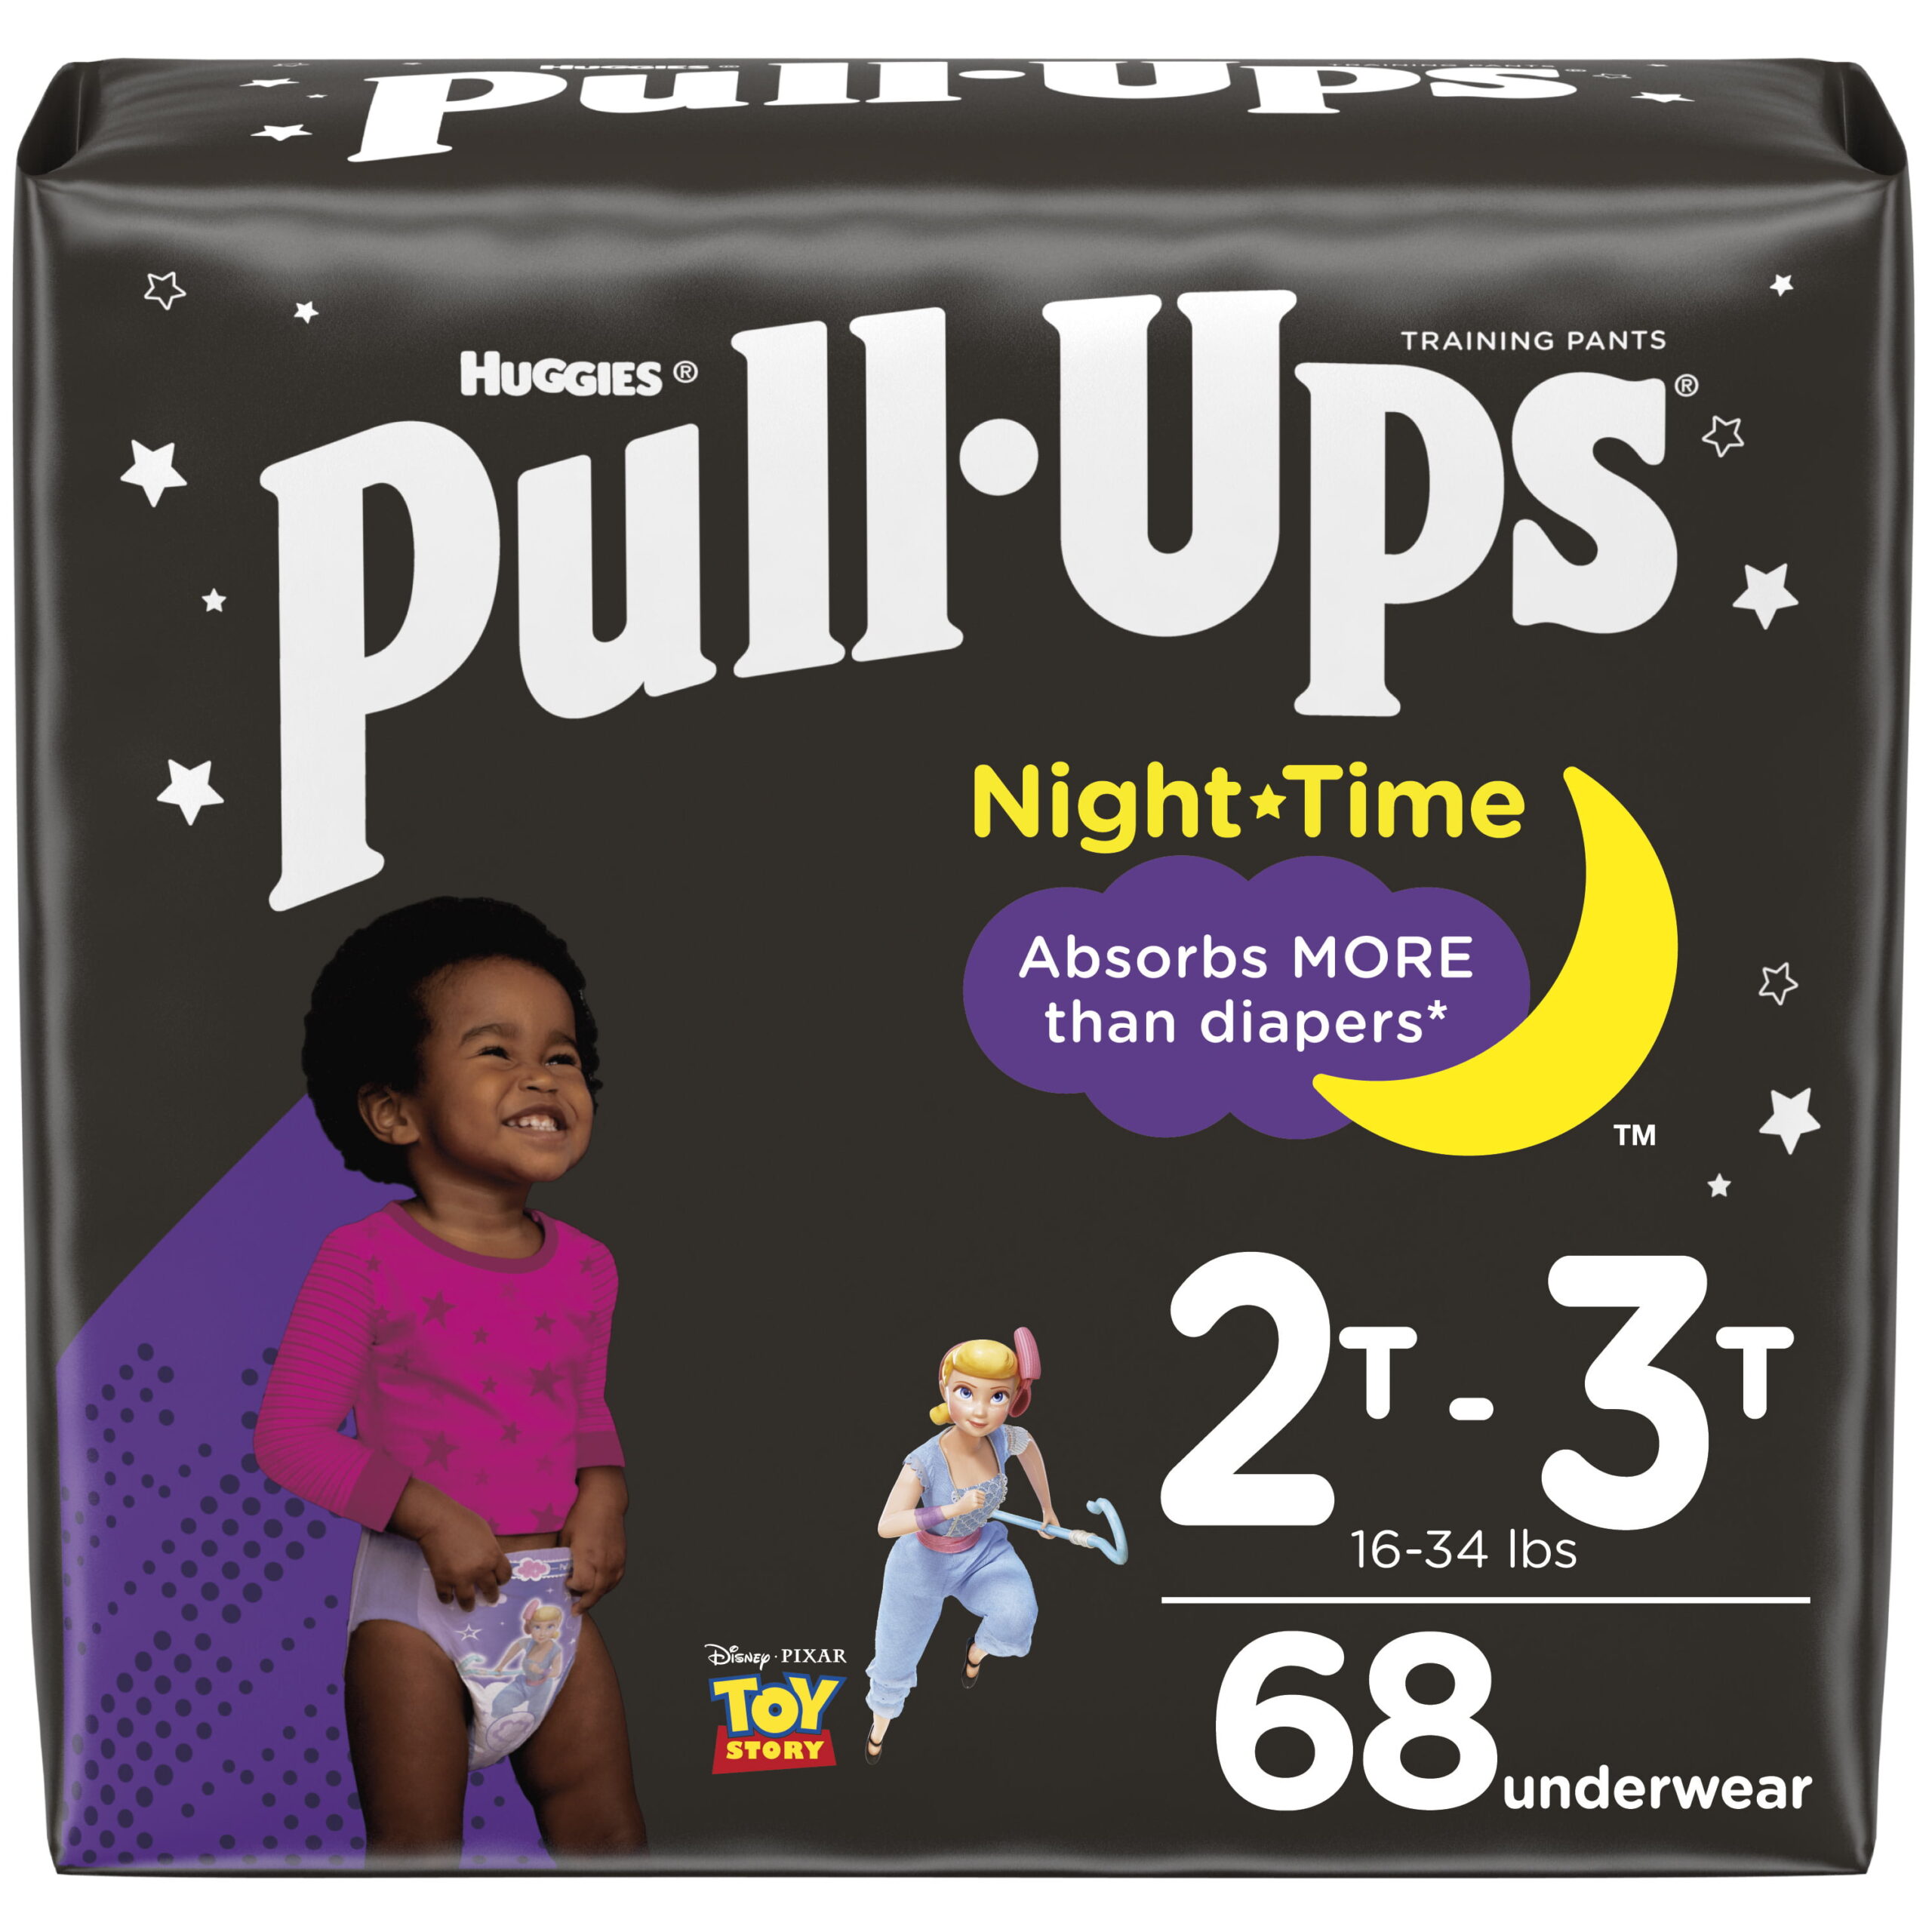 Pull Ups New Leaf Girls' Disney Frozen Potty Training Pants Review